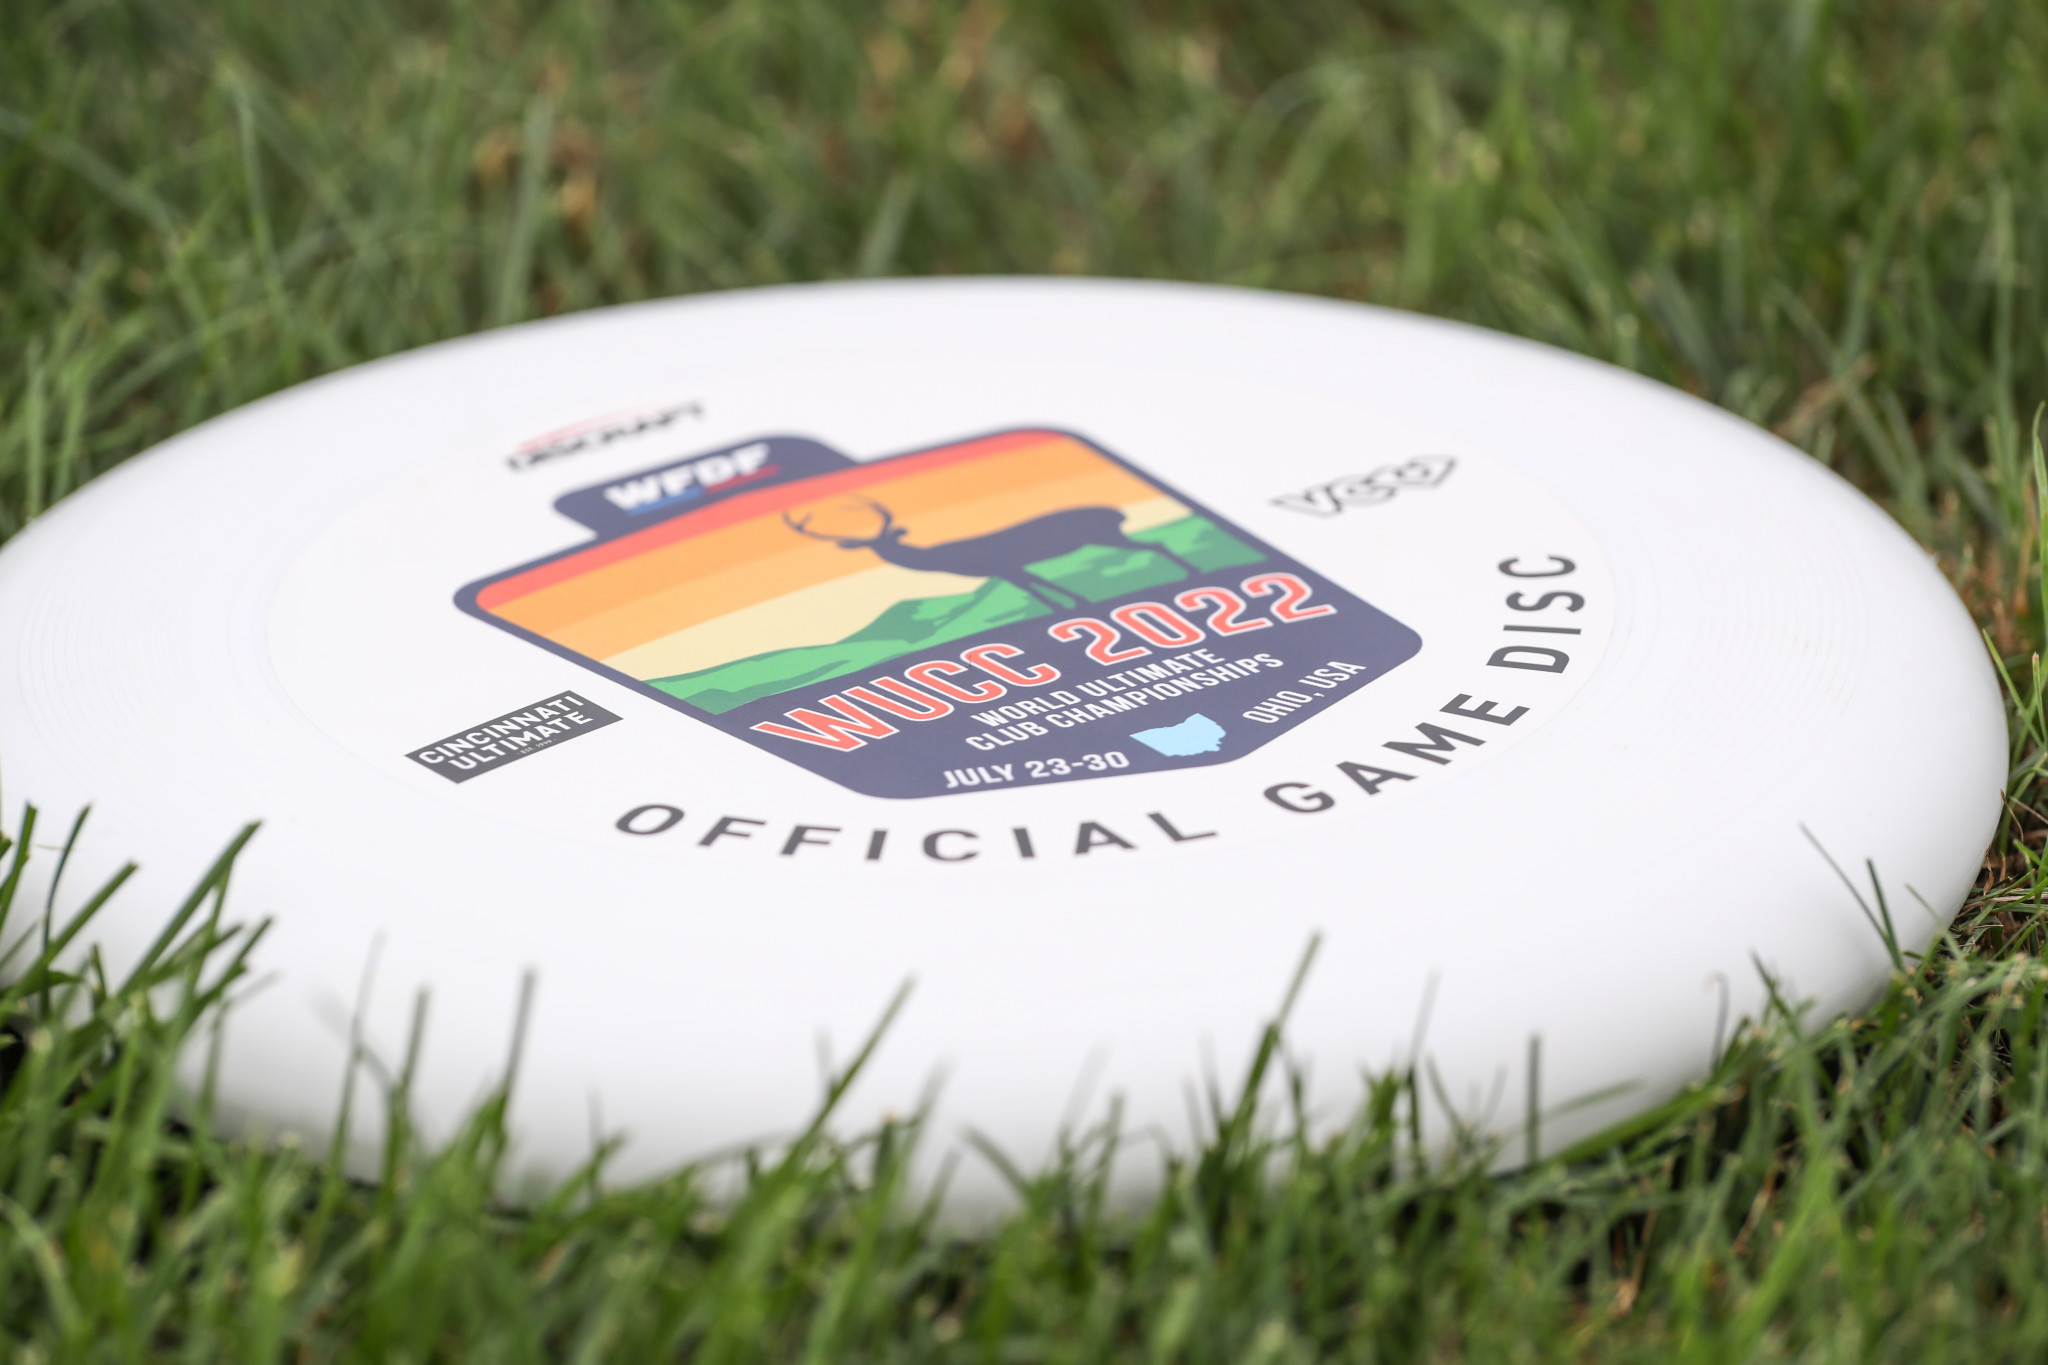 World Ultimate Club Championships Spirit of the Game director Nicole Bulos has called the rule "a pillar of ultimate" ©Paul Rutherford for UltiPhotos